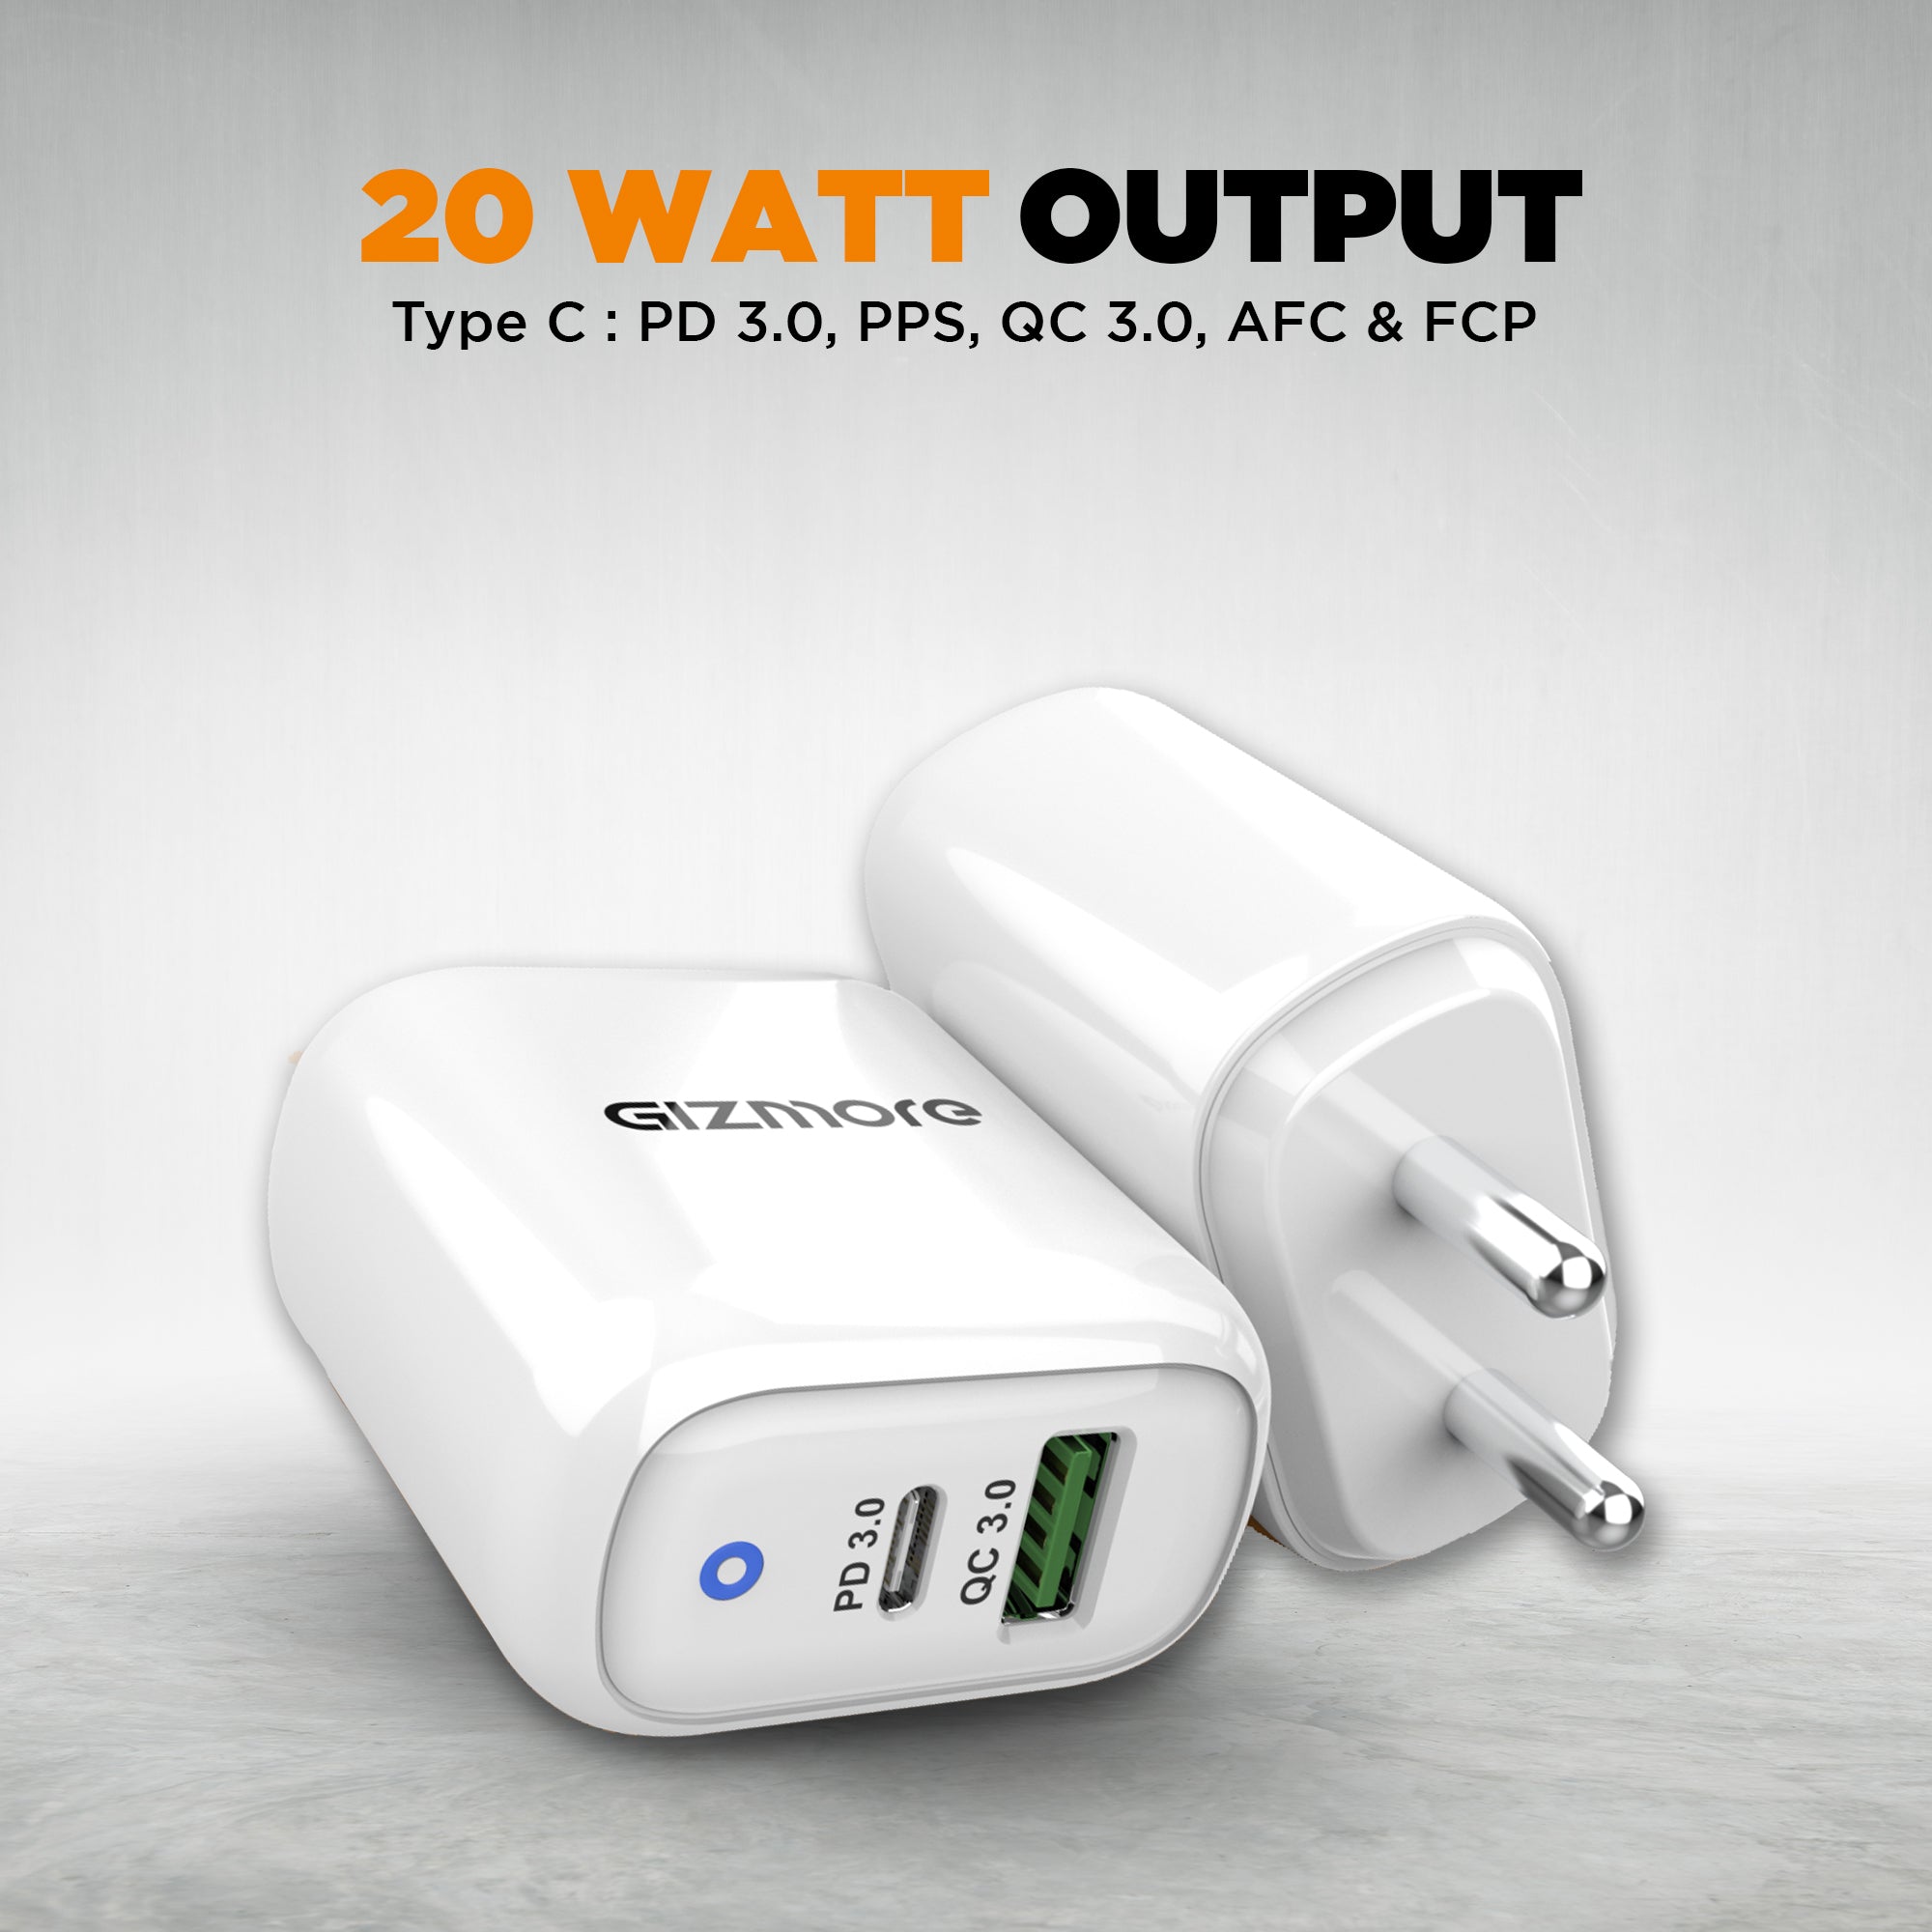 Gizmore 20W Charger|GIZ PA620|3.1A Output |QC & PD support Fast Charger| Multiport Universal Charger with OVP & OCP Protection| 1M Type C detachable Cable included with Charger(White, Cable Included)